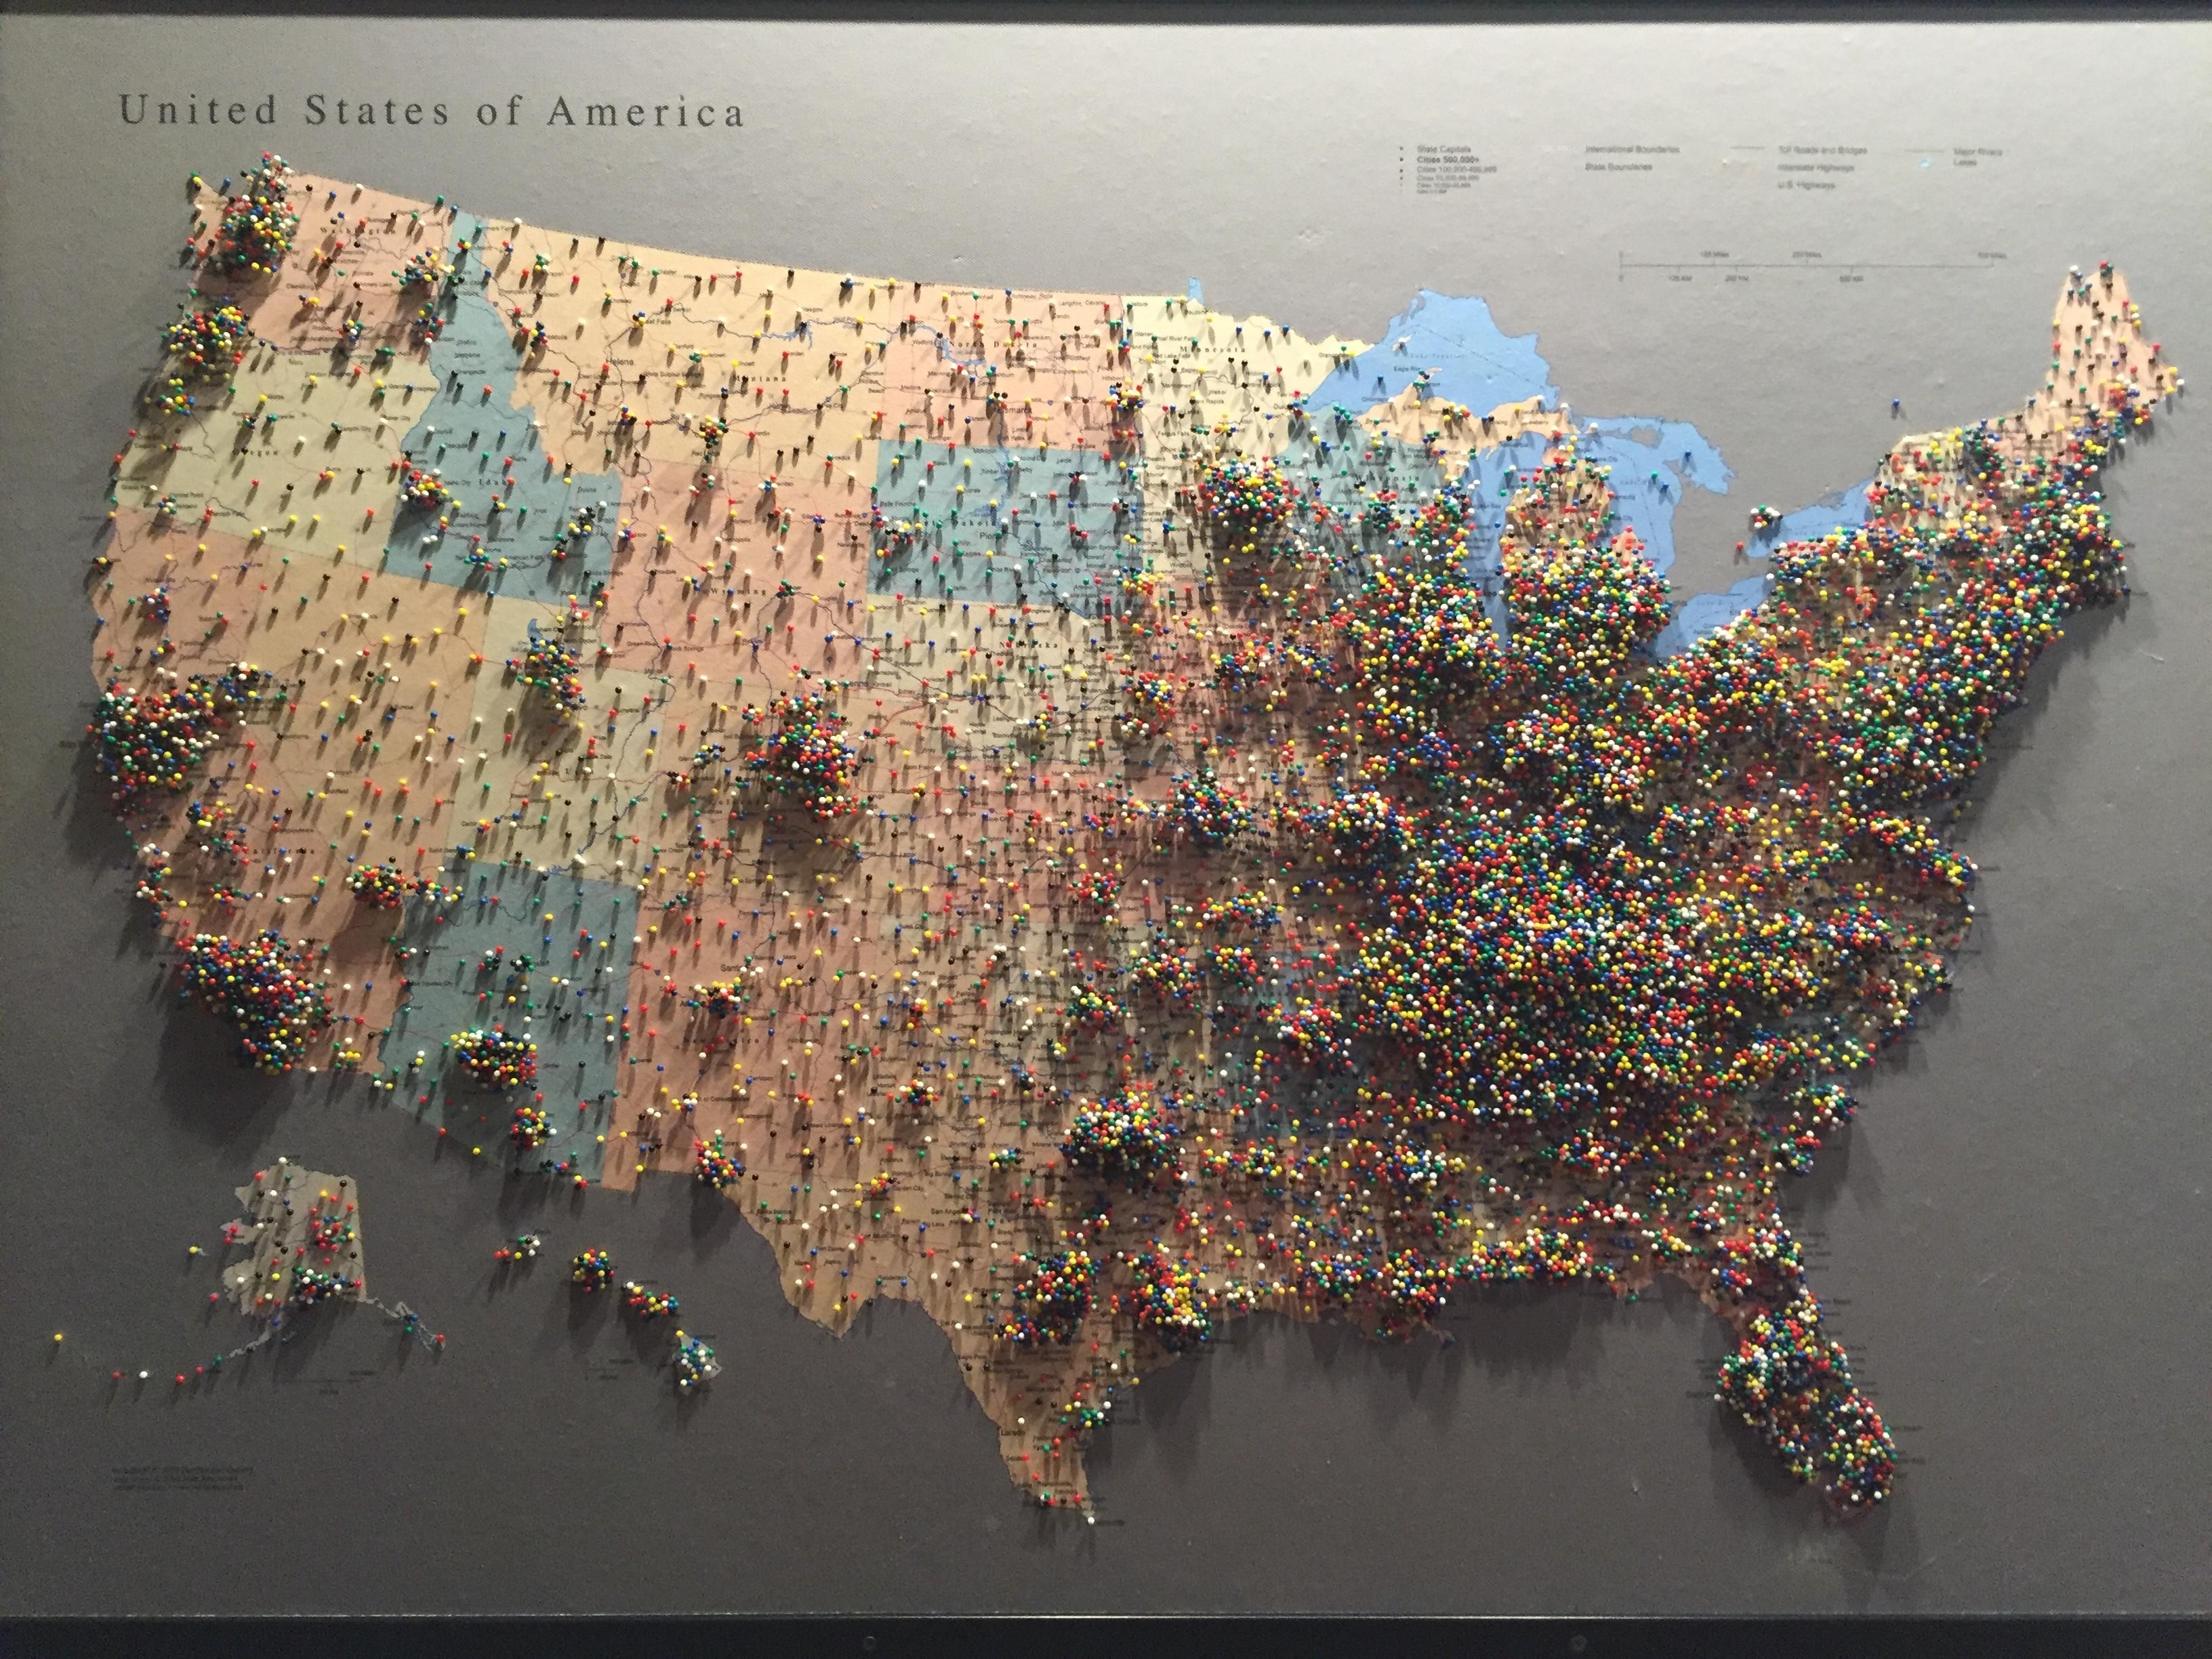 Where I work, we let customers pin their hometown on this map.